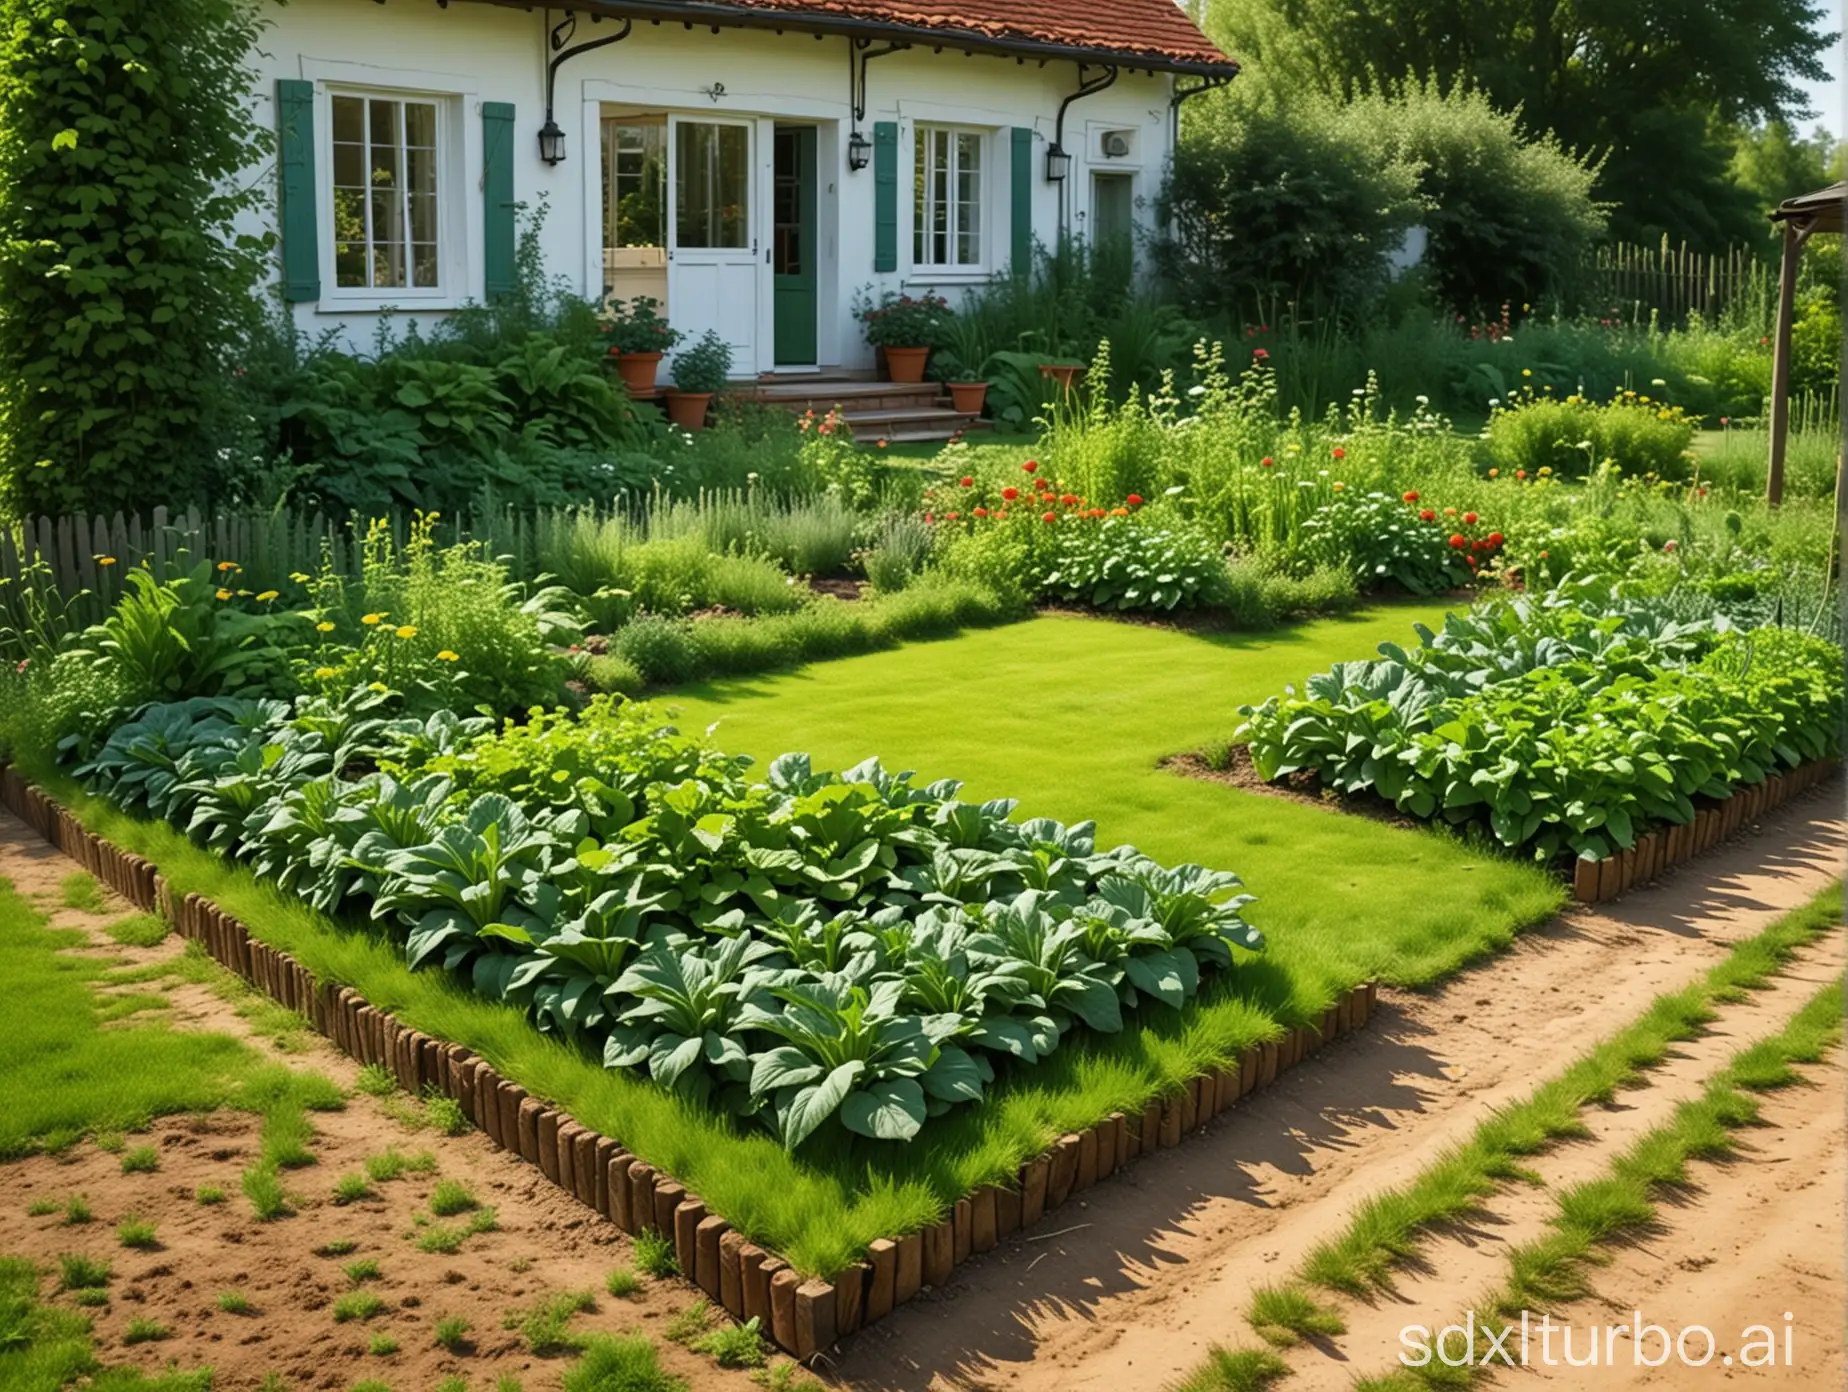 Sunny-Day-Realism-Country-House-and-Lush-Green-Lawn-with-Growing-Vegetables